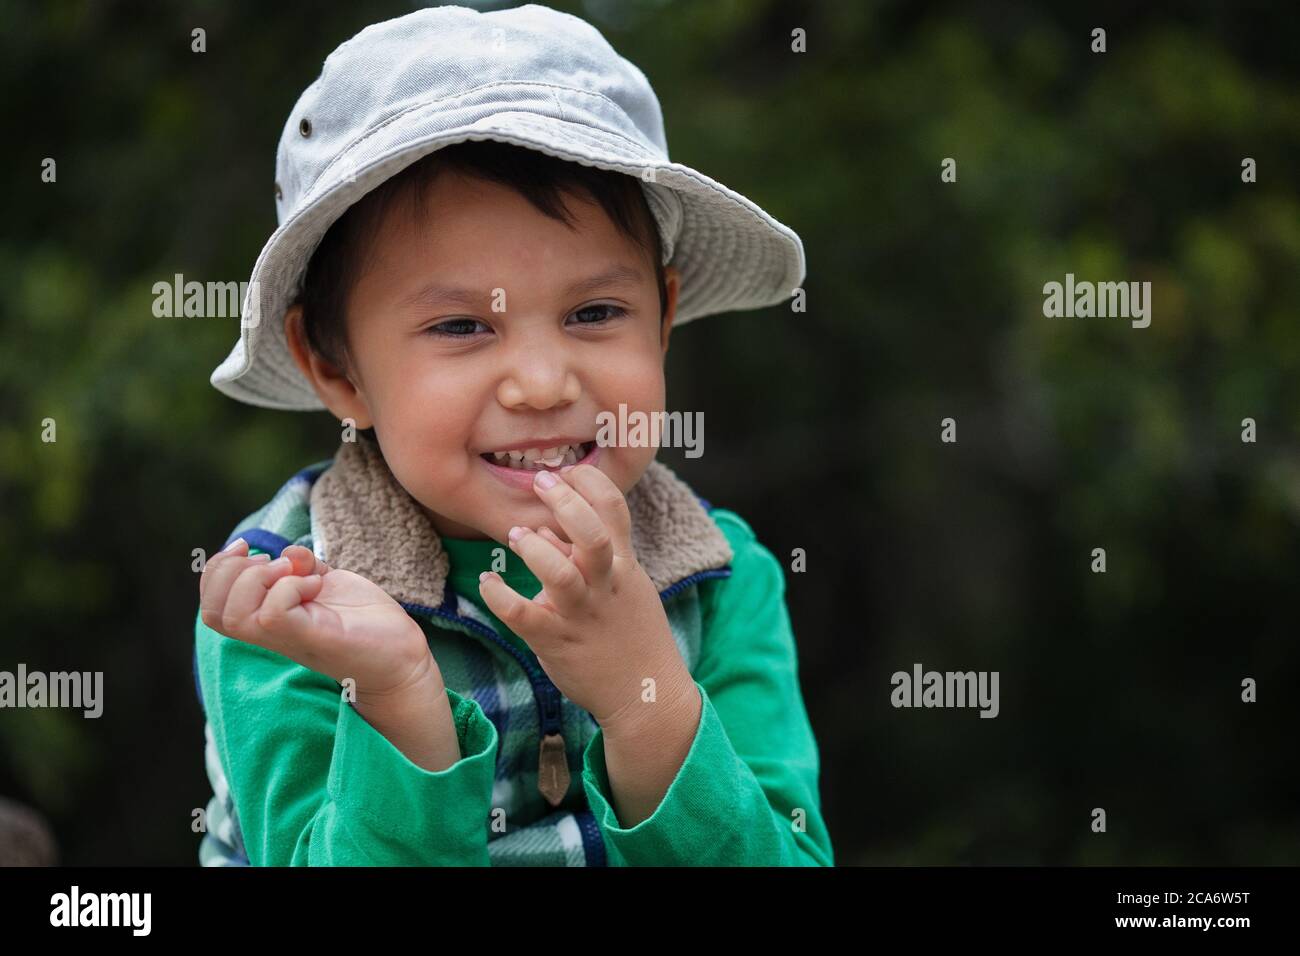 Toddler chewing gum and showing his baby teeth while outdoors on a nature trail. Stock Photo